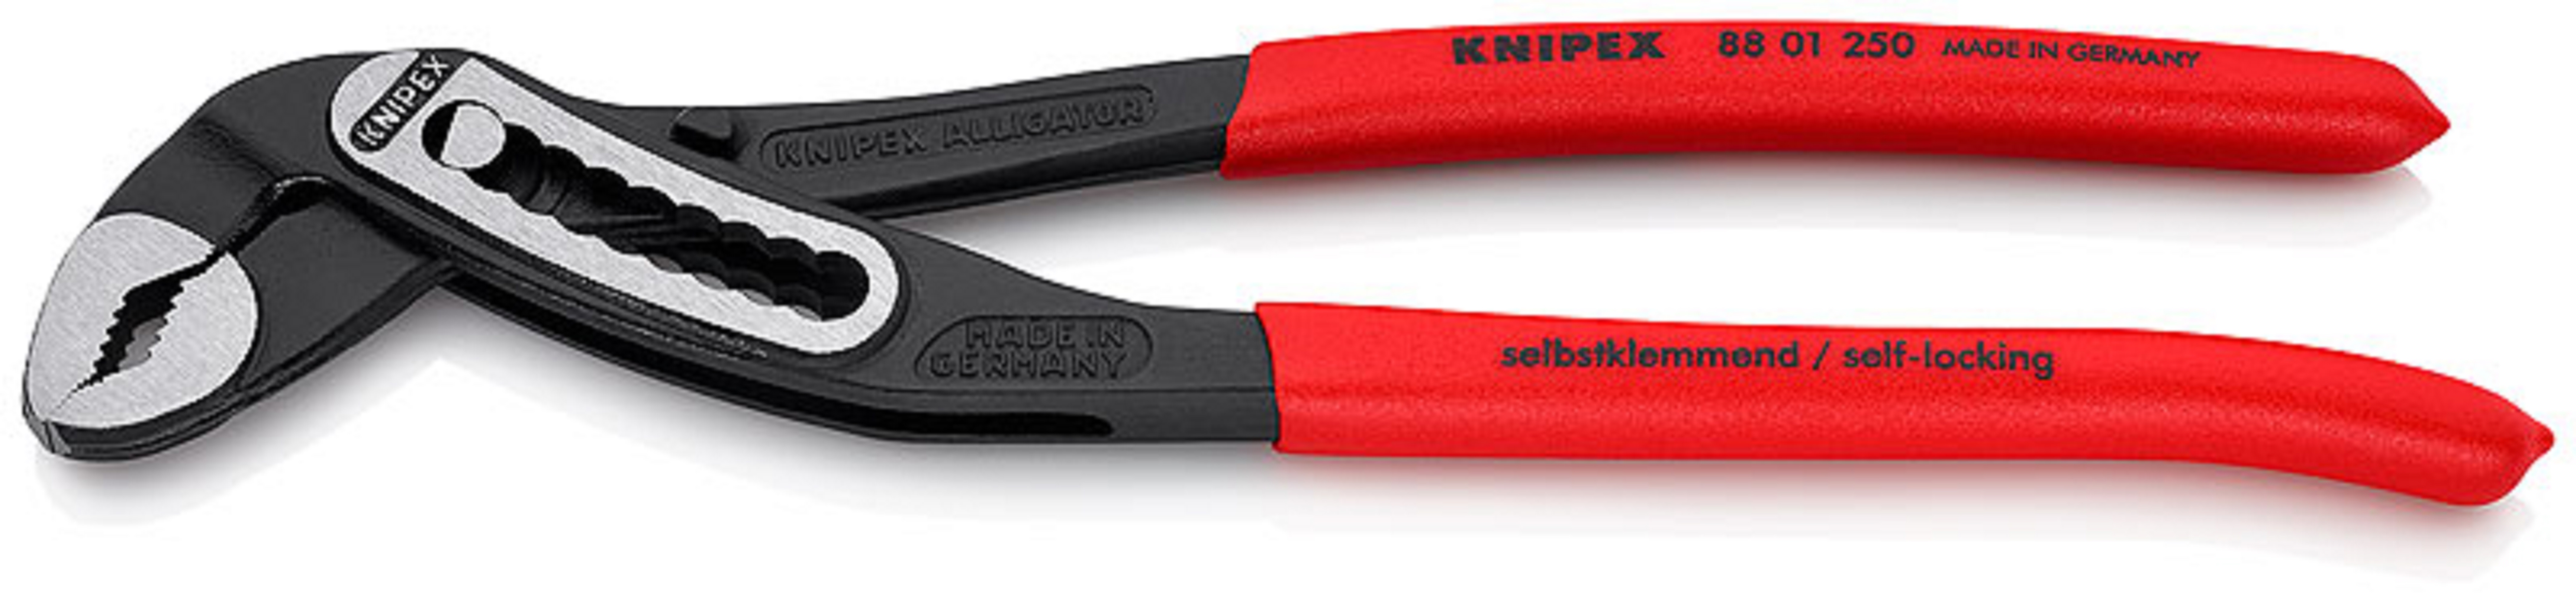 Knipex waterpomptang Alligator 250mm - 8801250